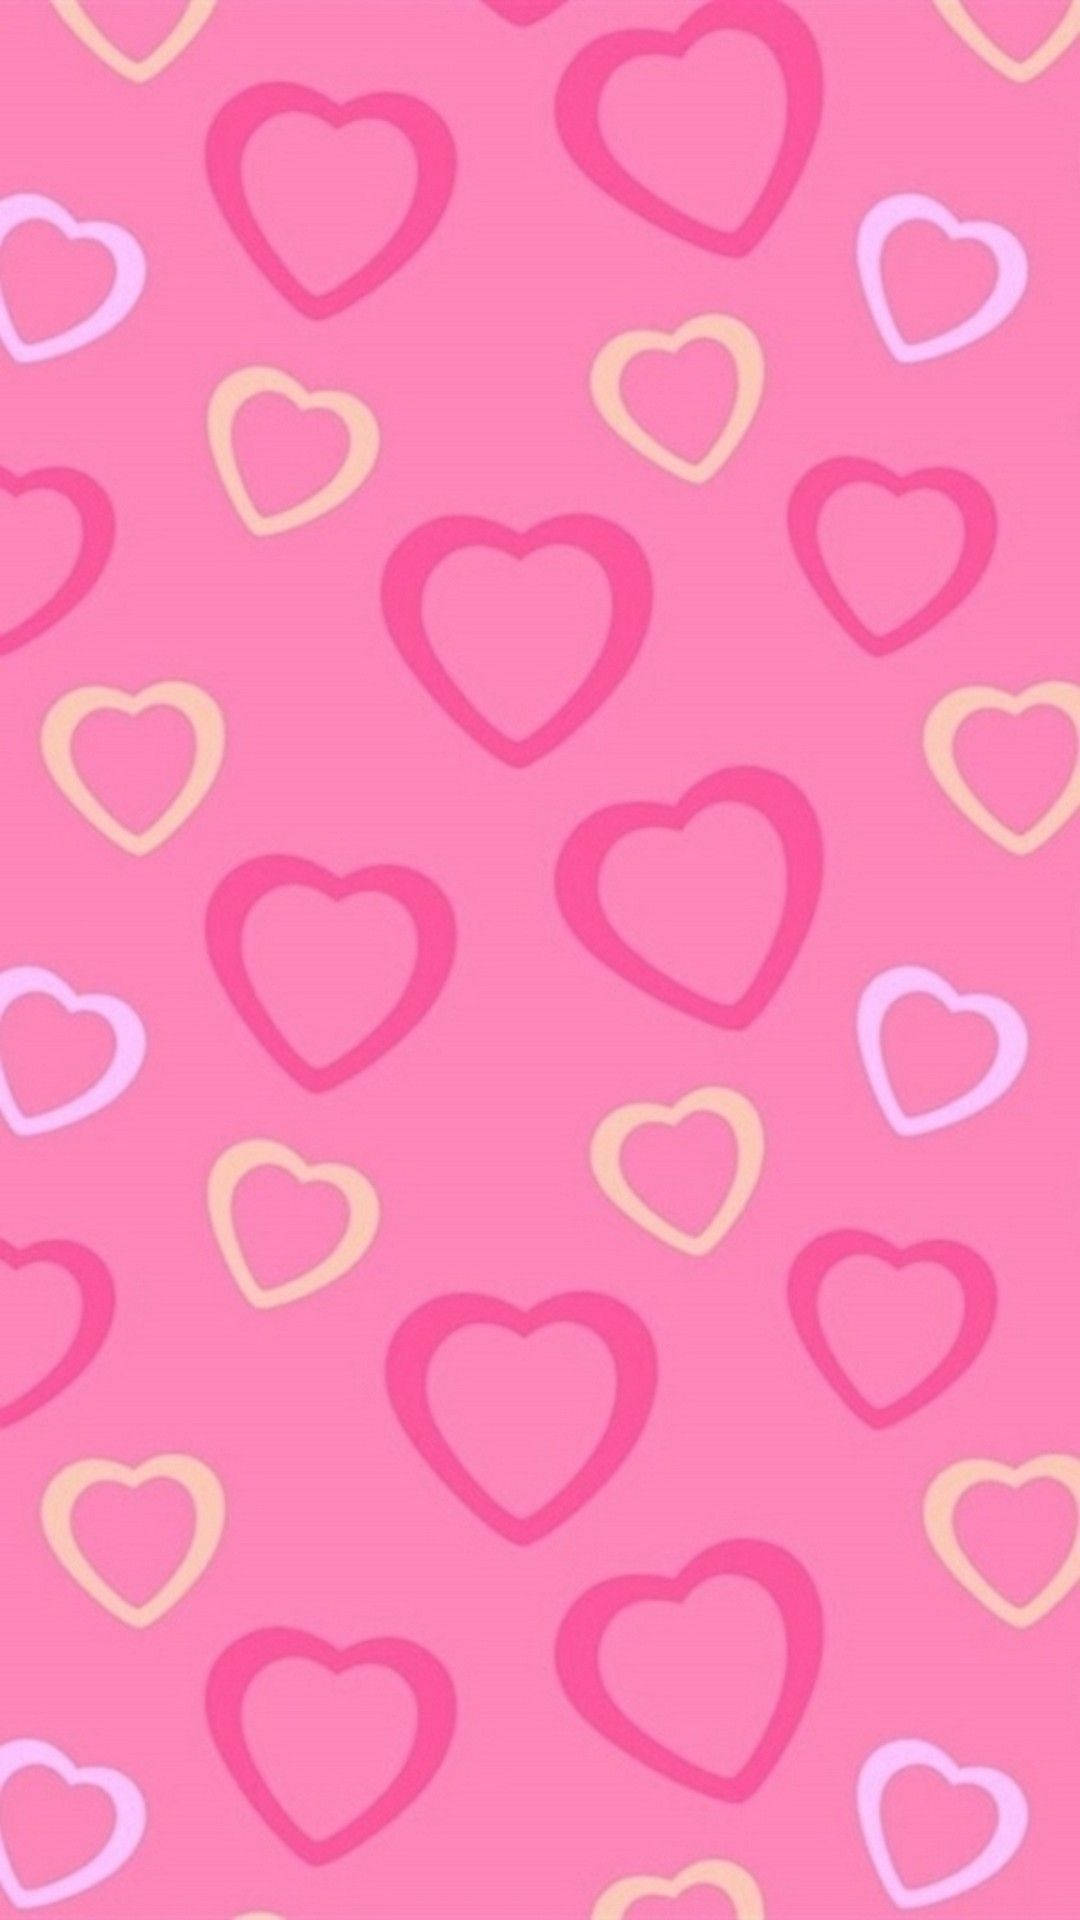 Cute Girly Hearts Background